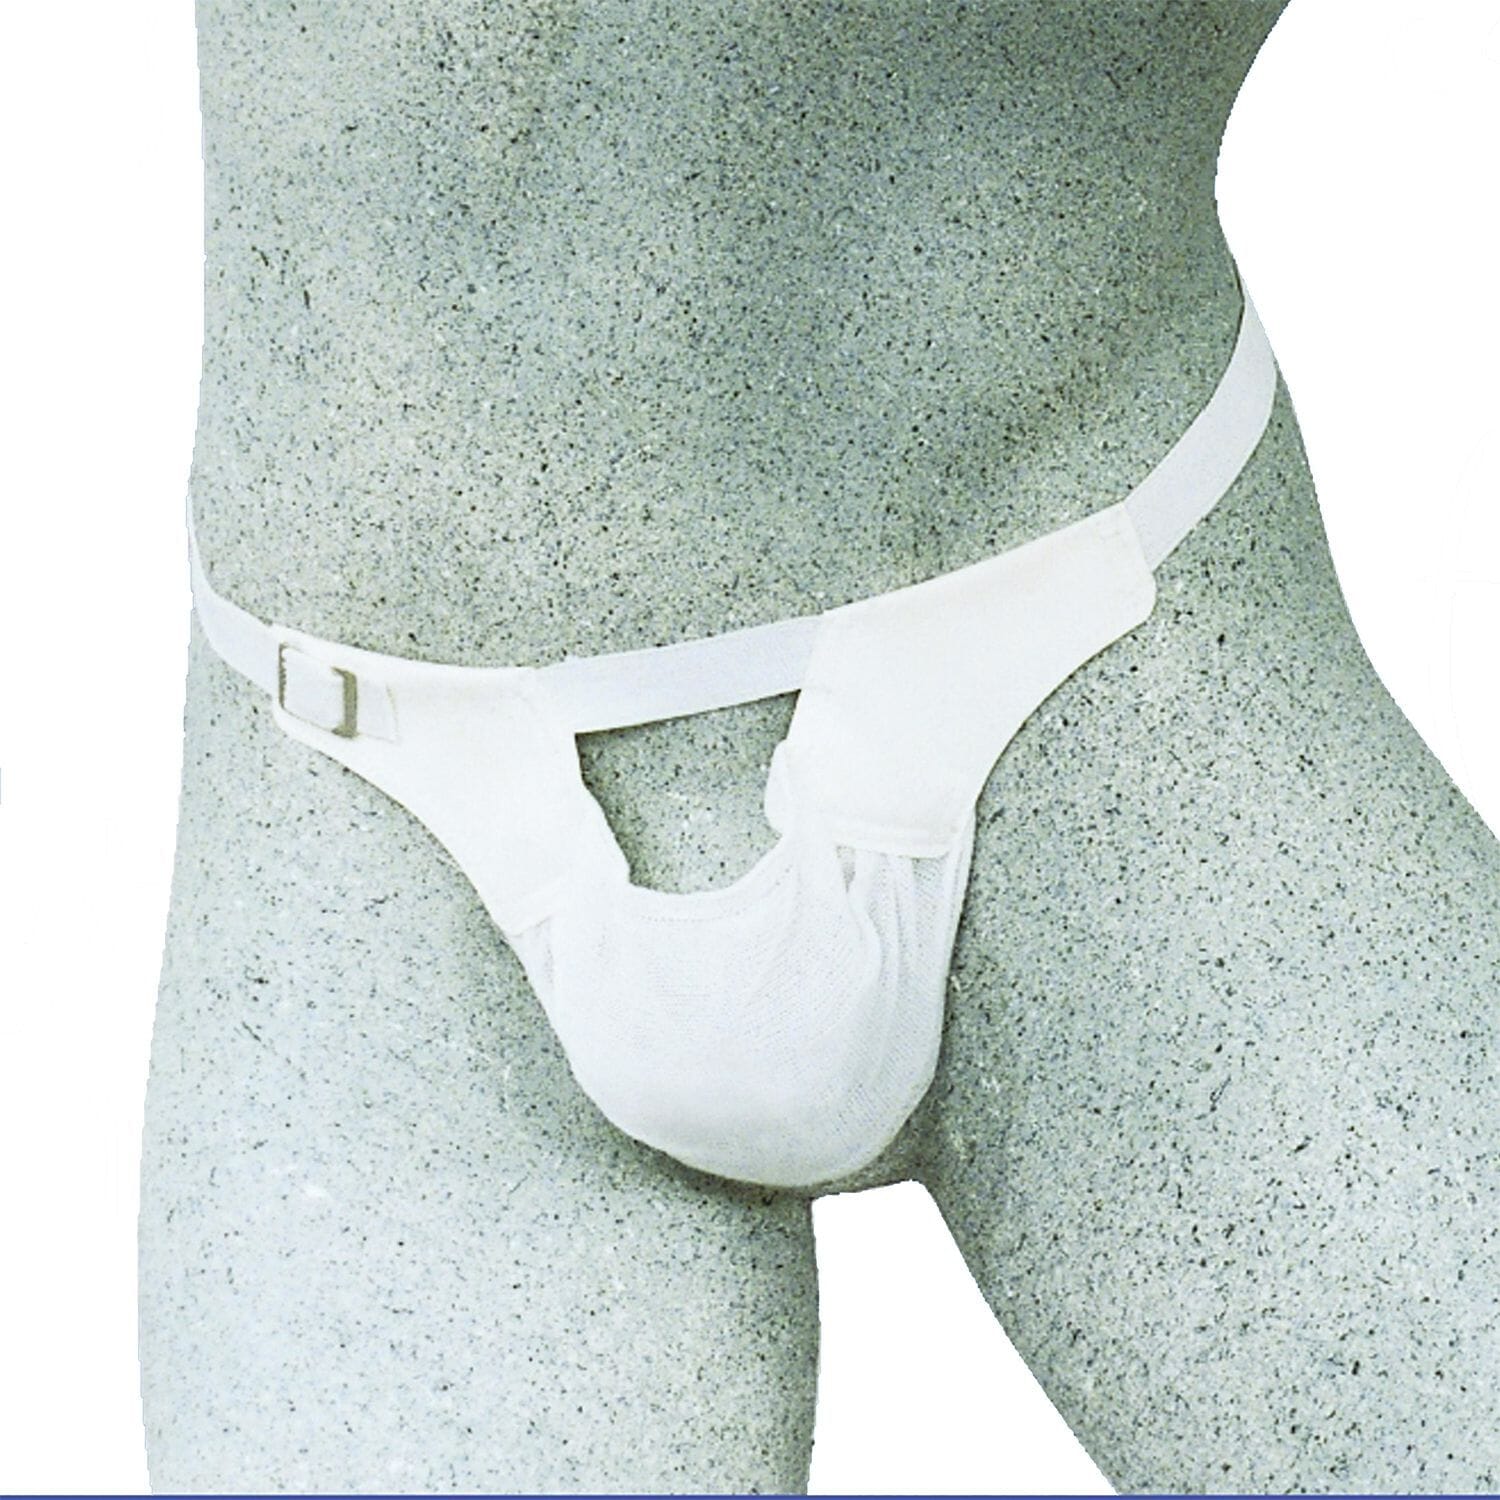 View Back Support Hernia Belt information